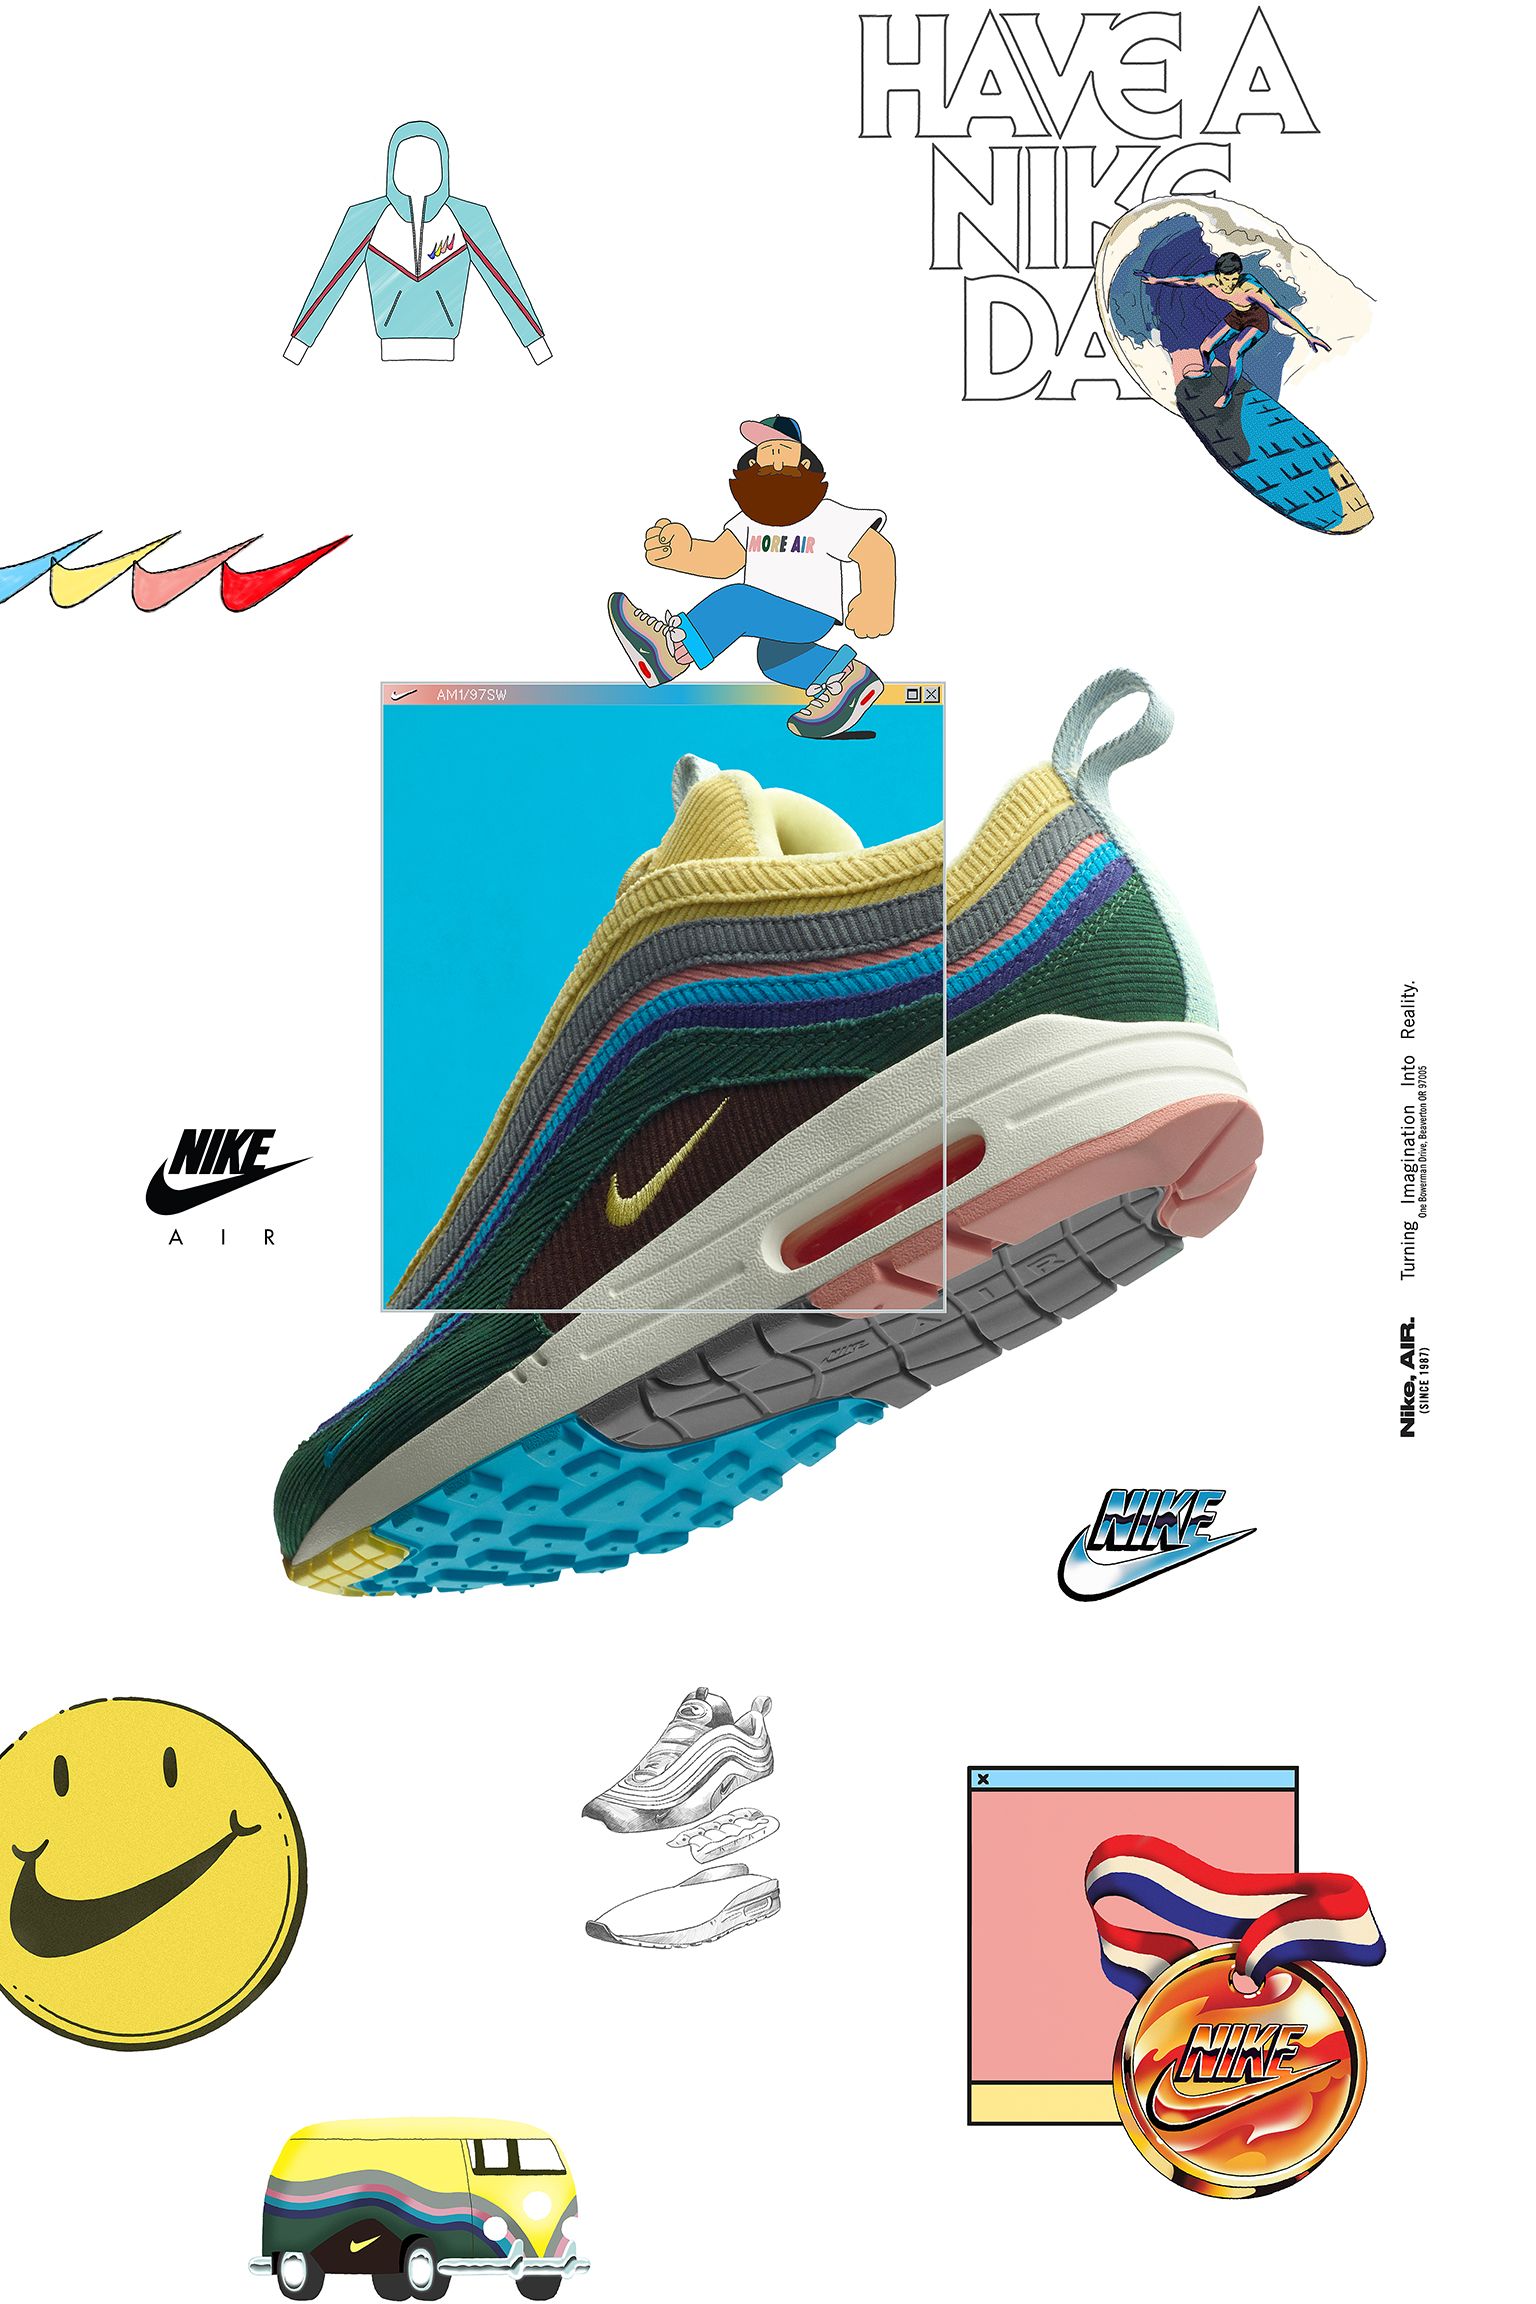 Stick out Kills thief Nike Air Max 1/97 'Sean Wotherspoon' Release Date. Nike SNKRS